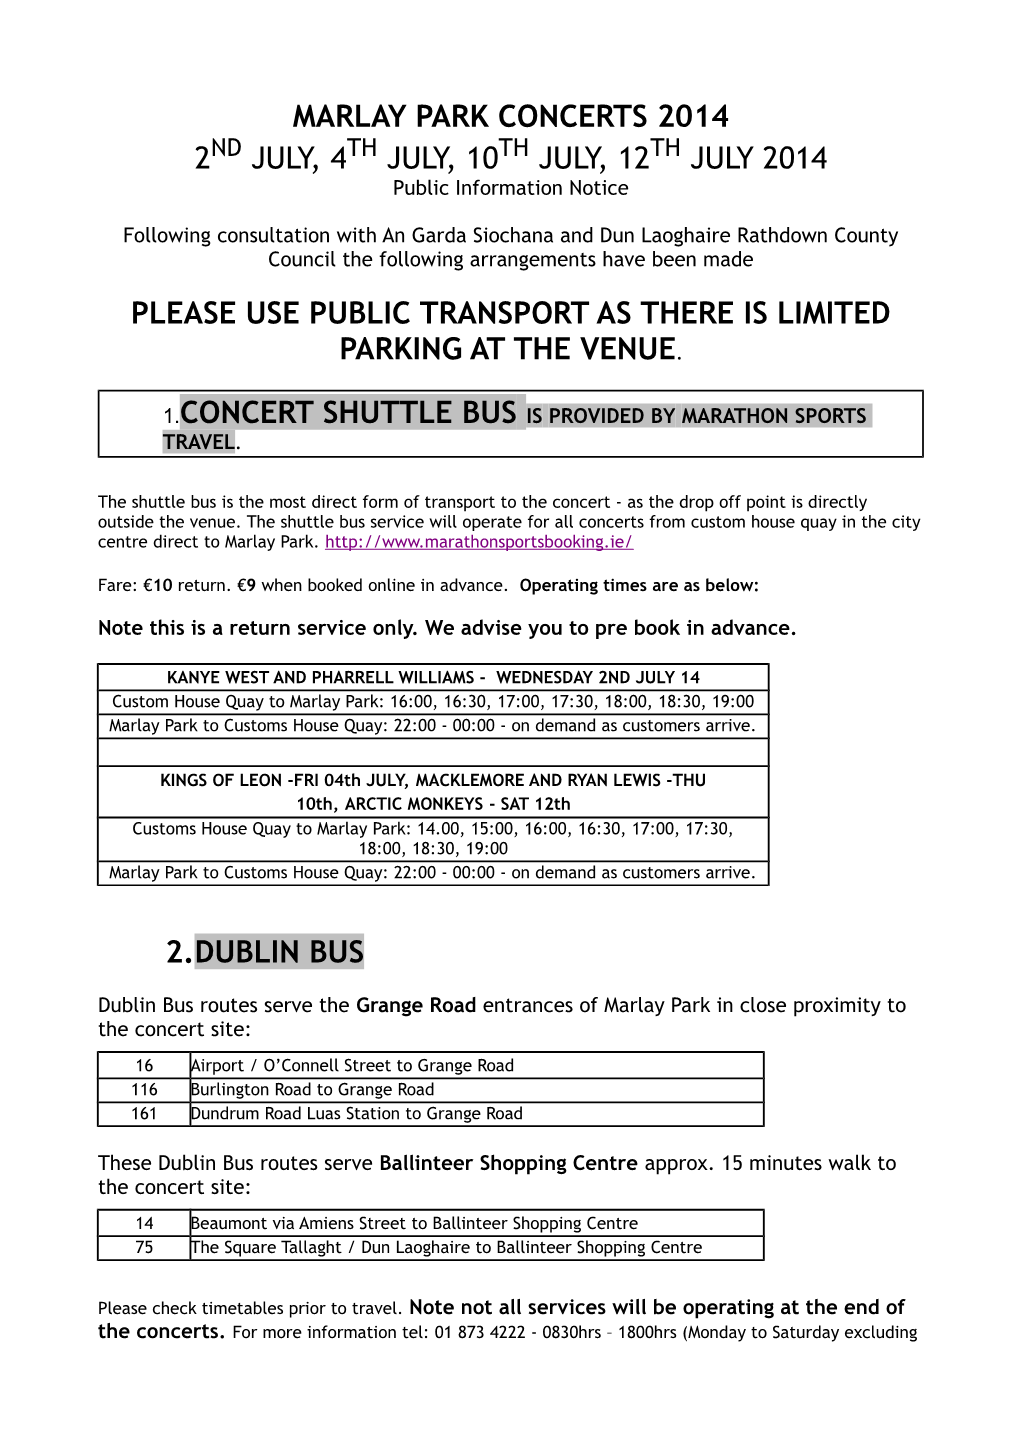 MARLAY PARK CONCERTS 2014 2ND JULY, 4TH JULY, 10TH JULY, 12TH JULY 2014 Public Information Notice